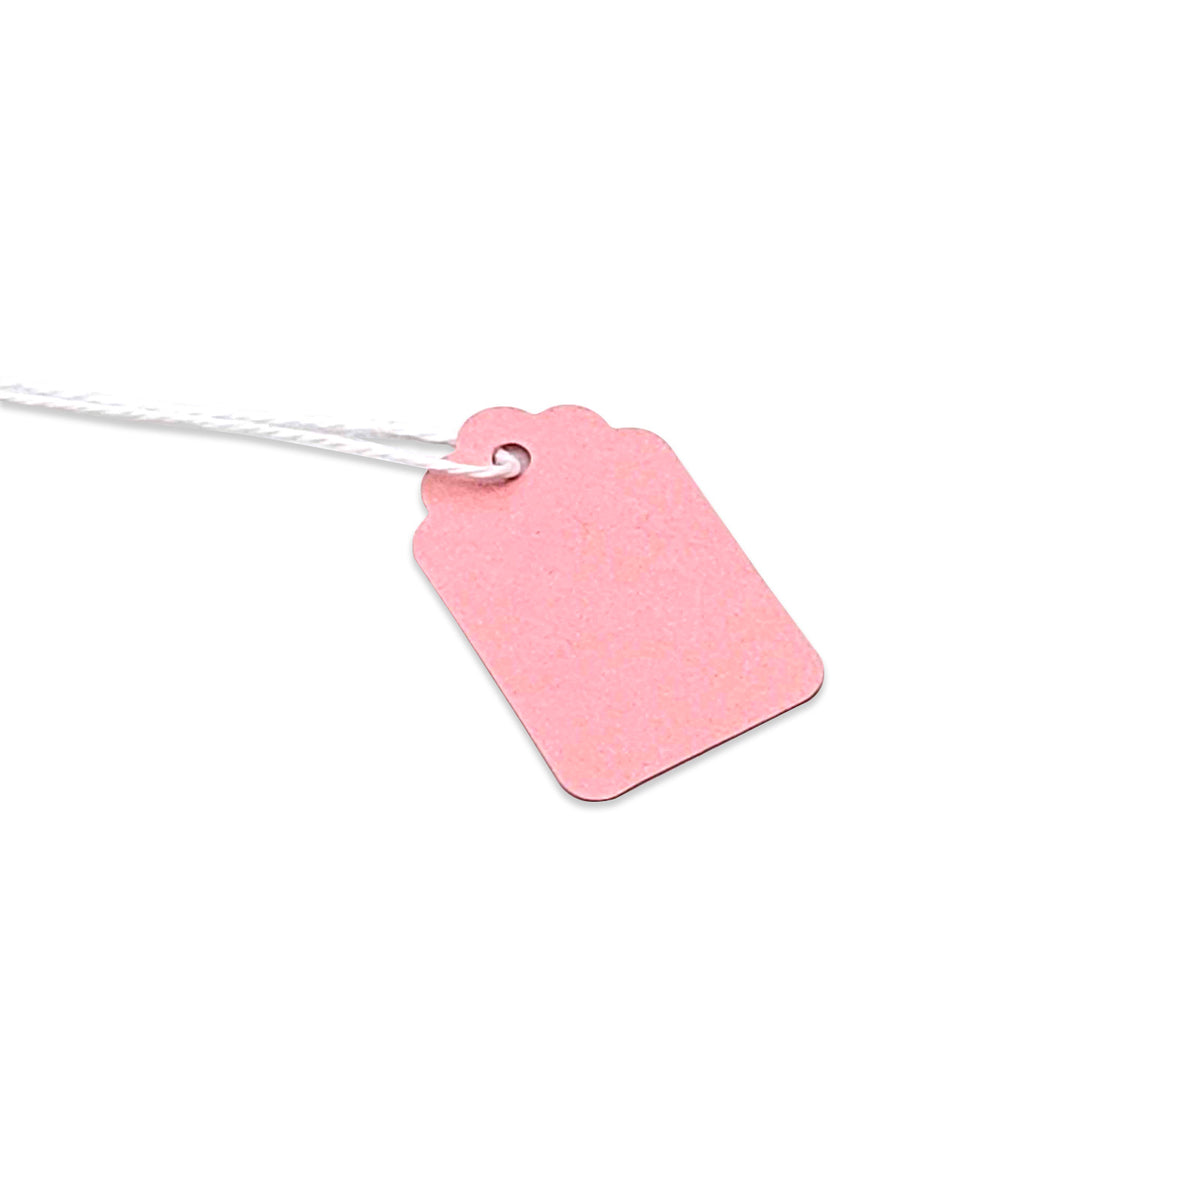 100-Pack of 22 x 35mm Pink Paper Knotted String Price Tags – JPI Display